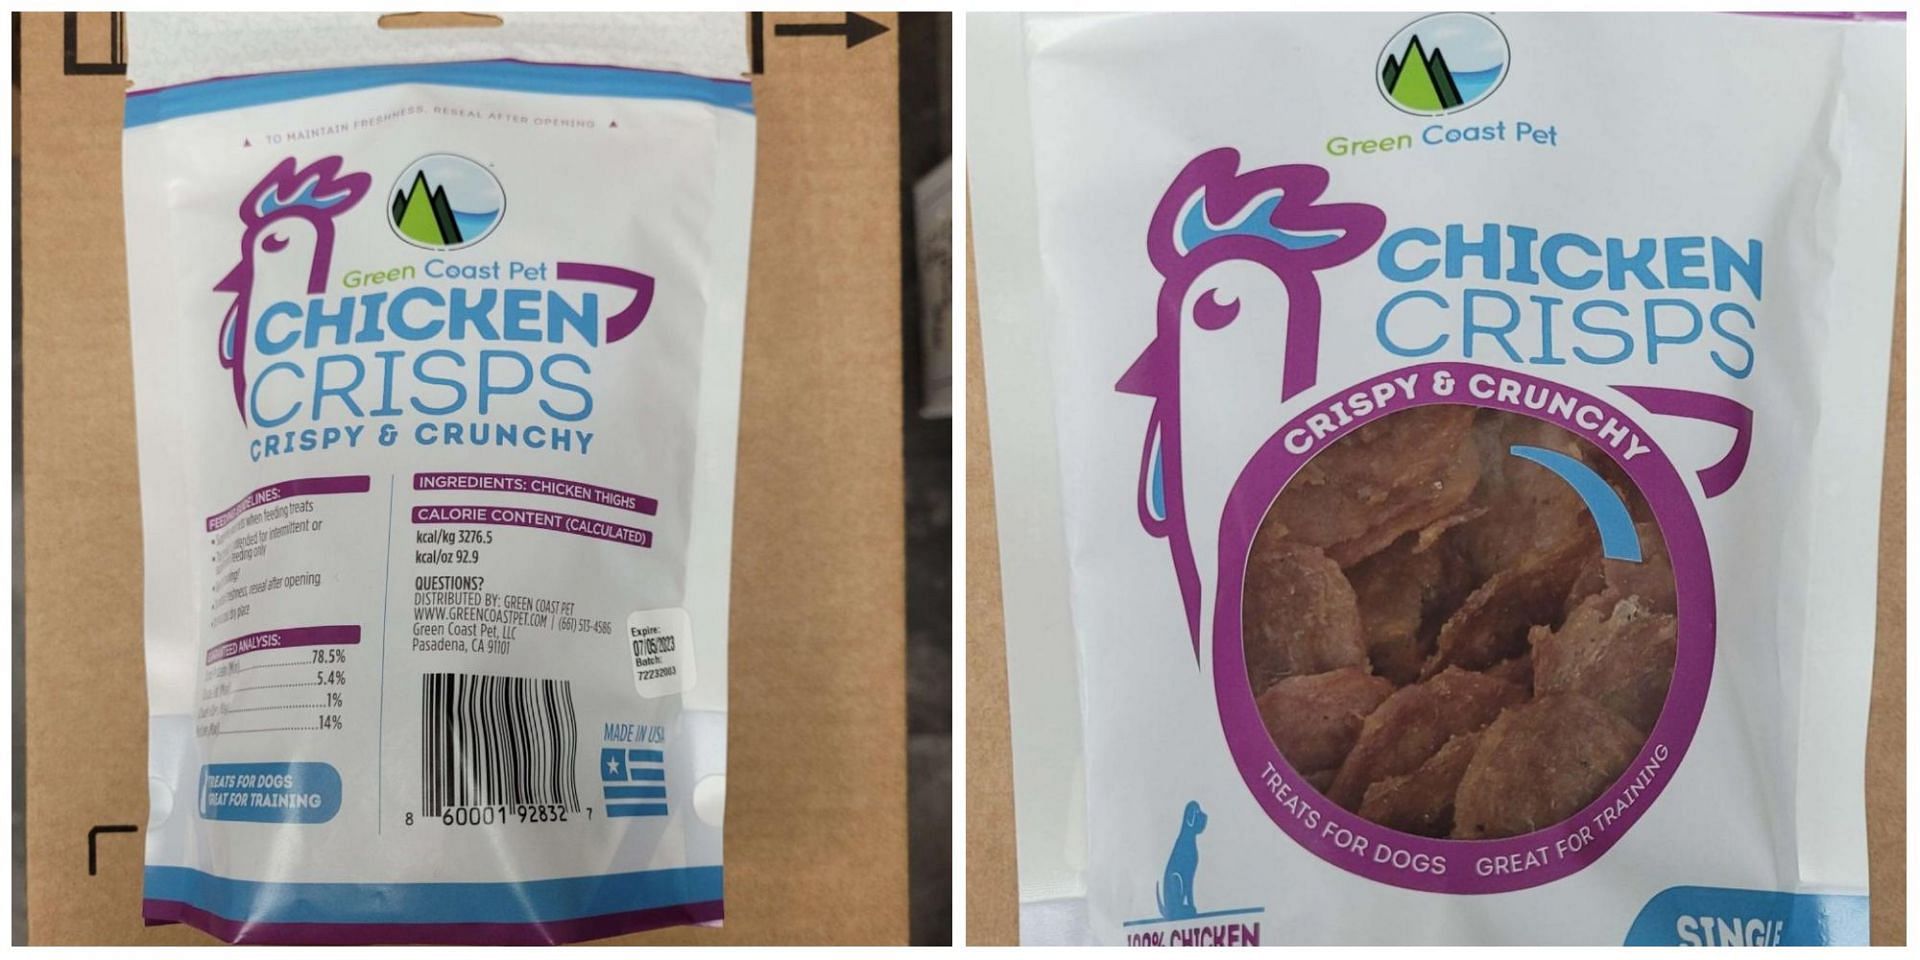 Batches of dog food sold between June 8 and June 22 are on a recall, as some of the samples tested positive for Salmonella contamination. (Image via FDA)